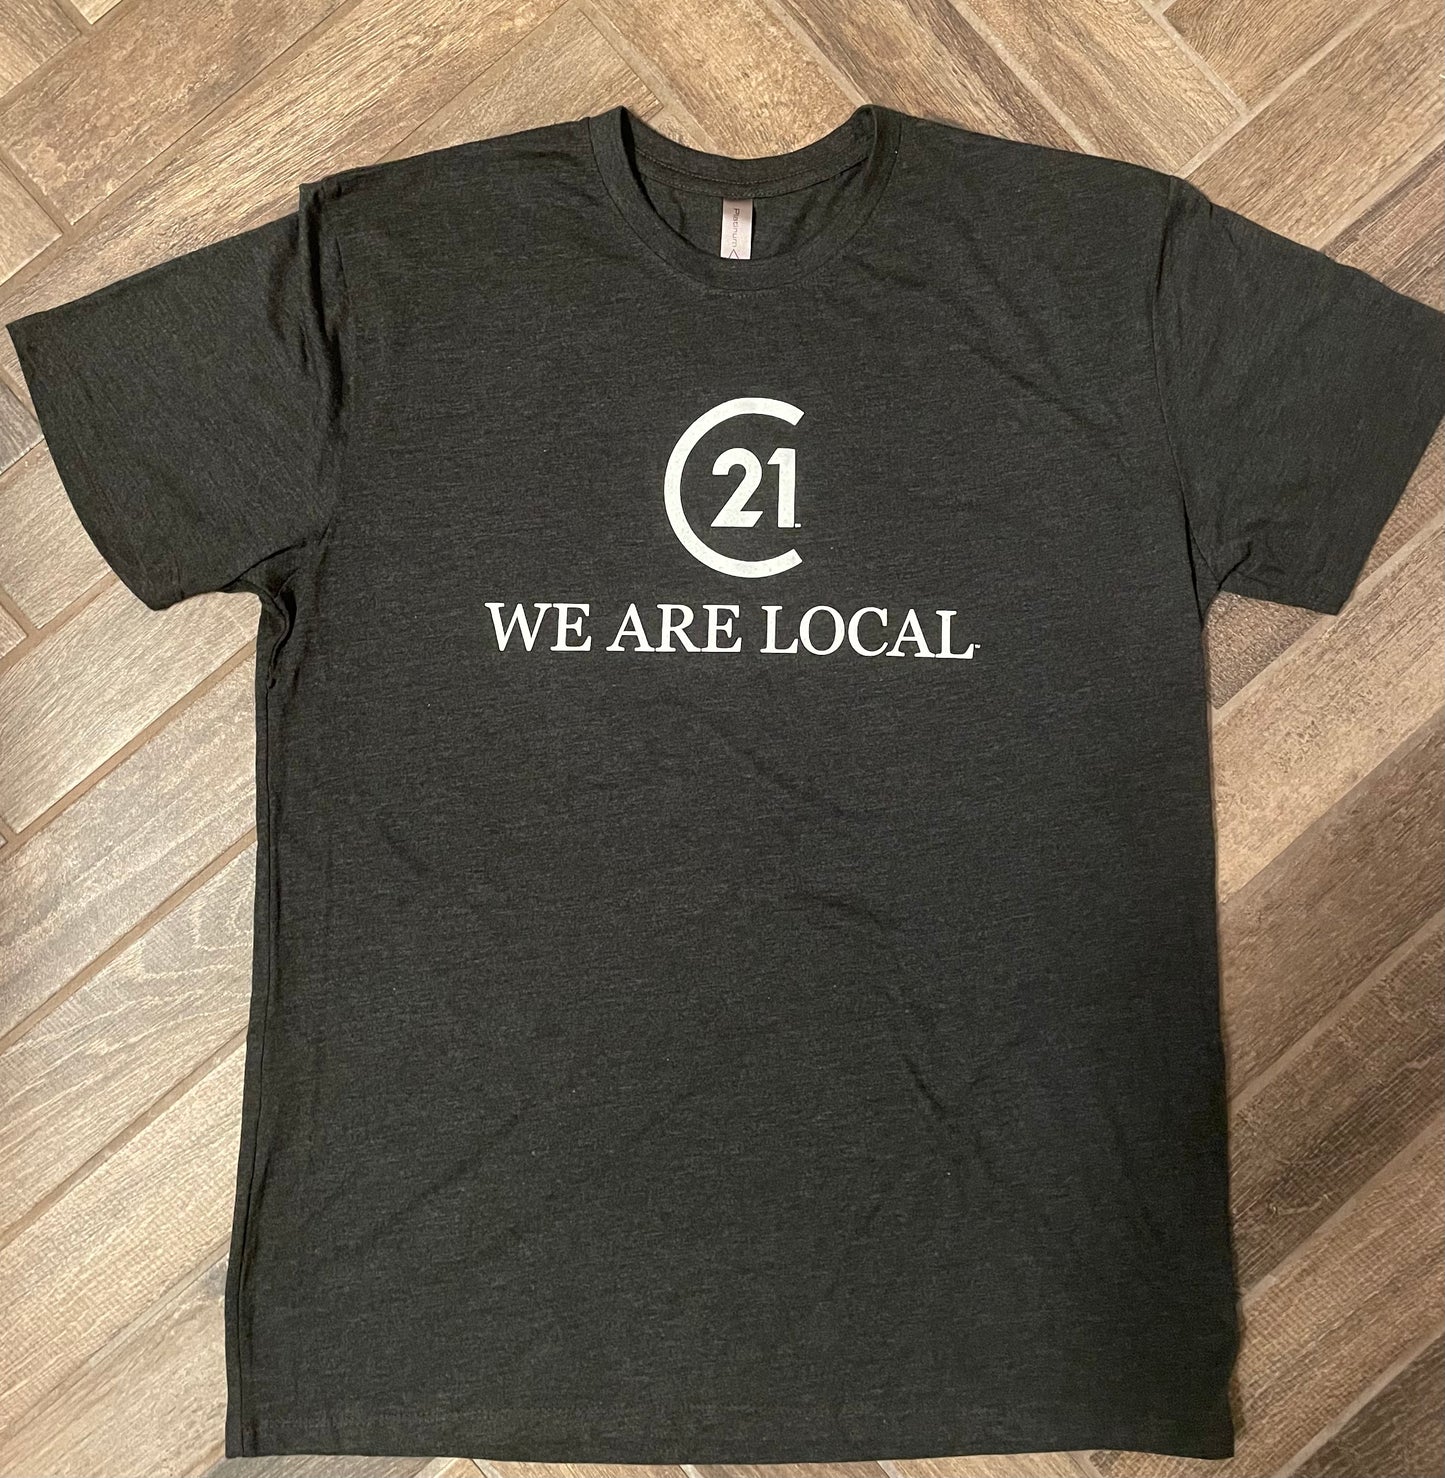 SOFT TRI-BLEND C21 WE ARE LOCAL WARDROBE MUST HAVE TEE